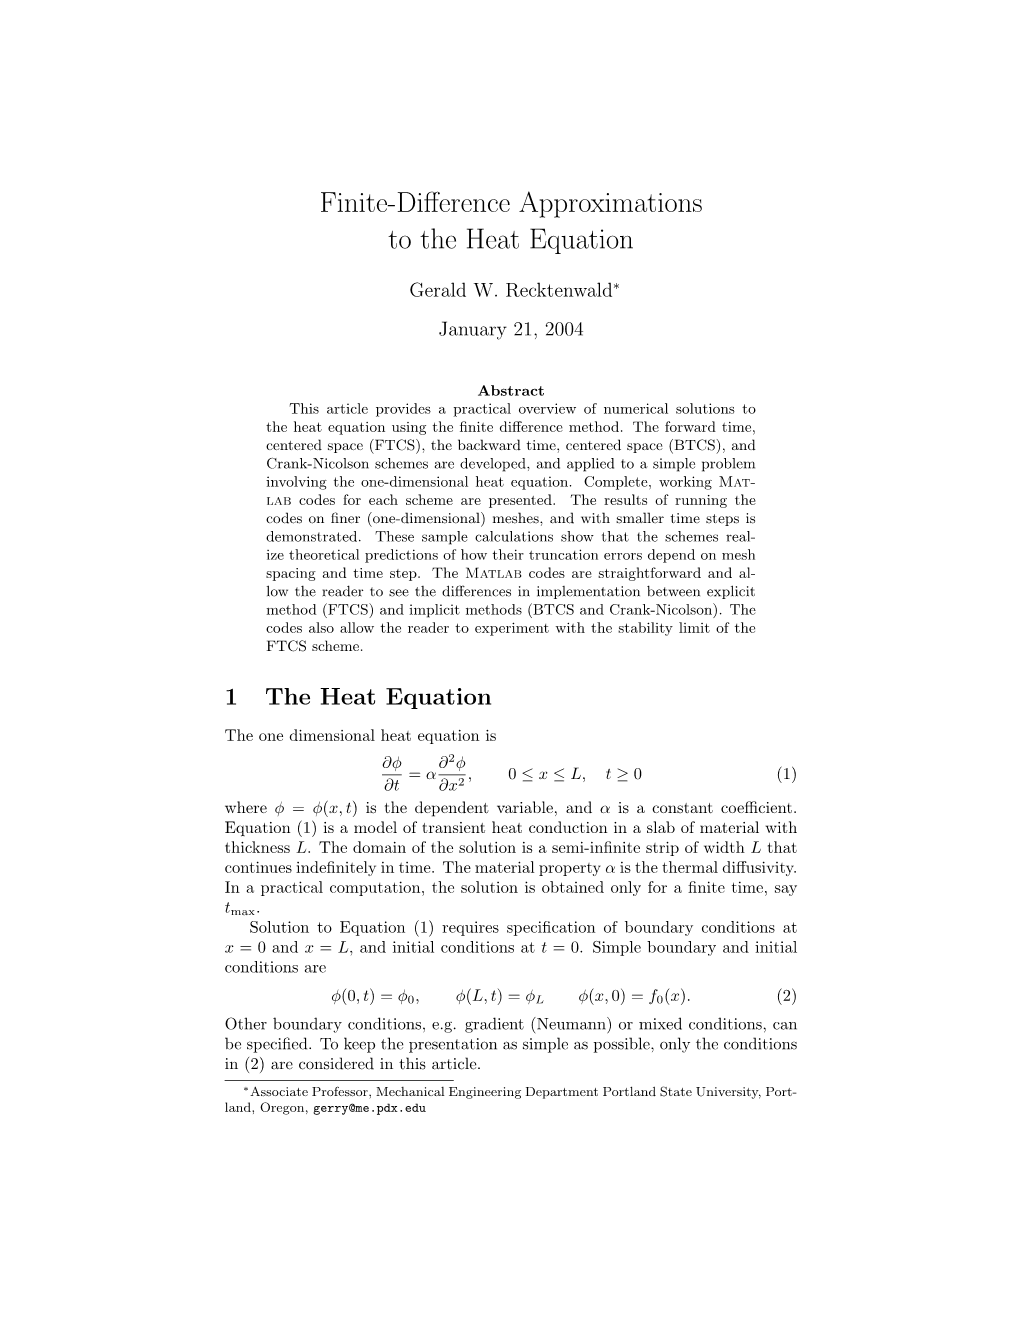 Finite-Difference Approximations to the Heat Equation